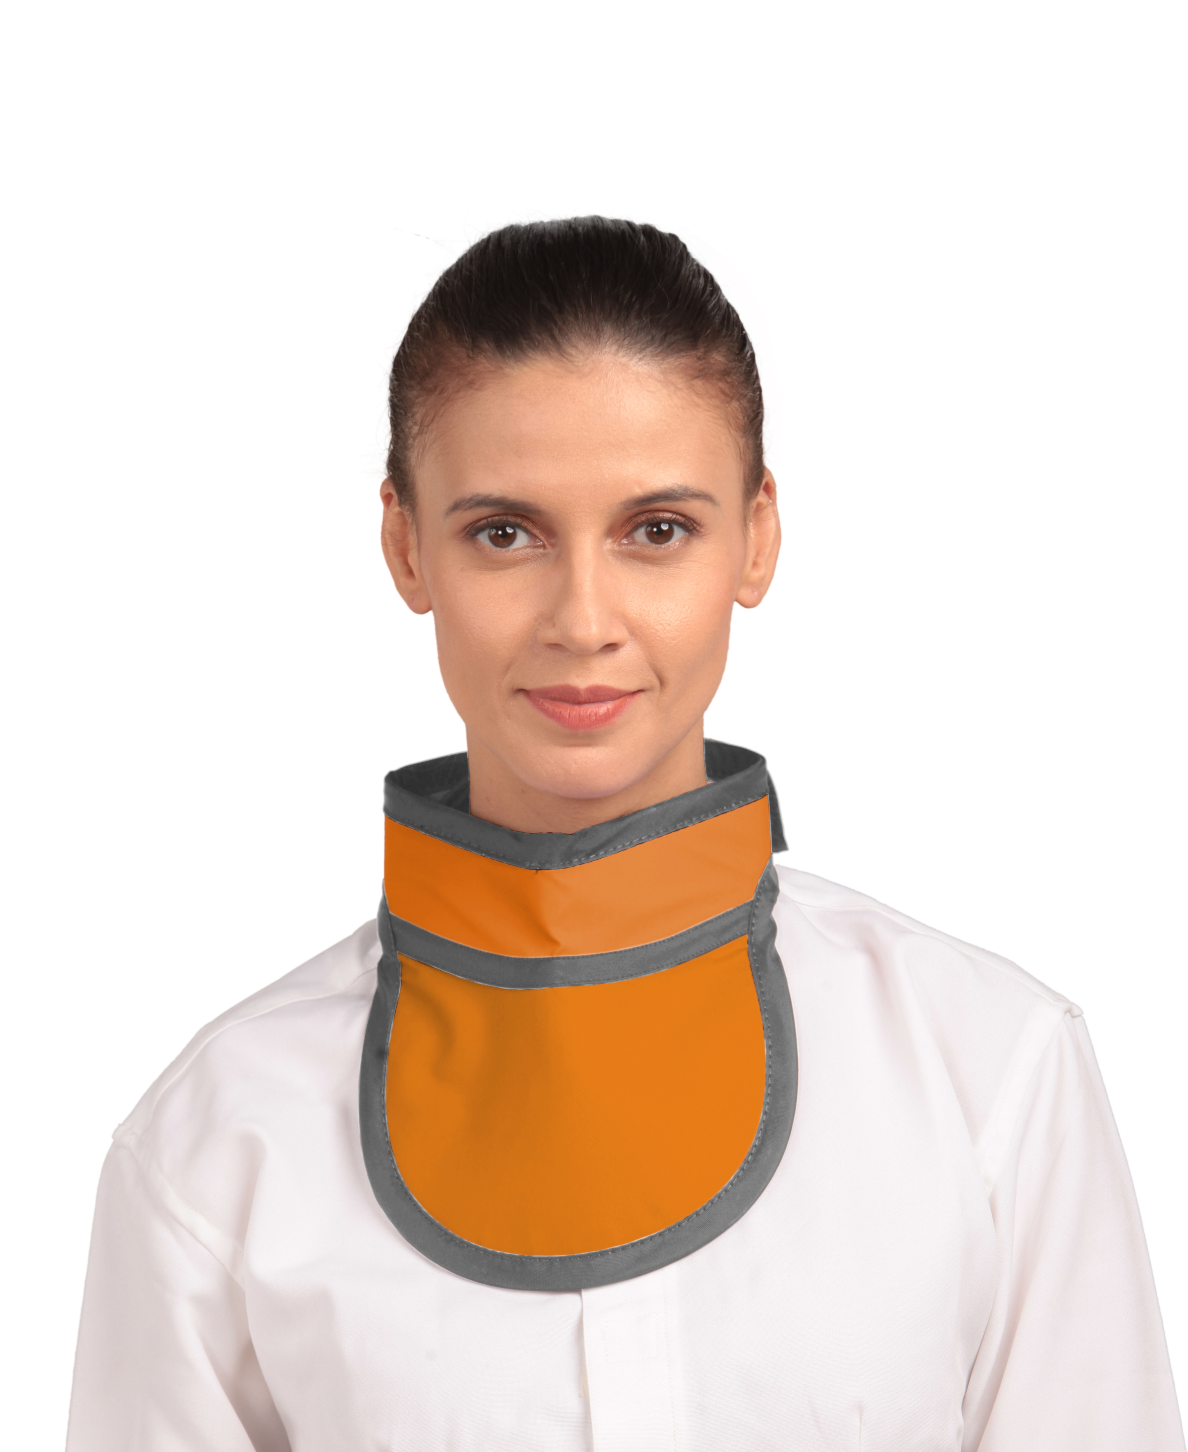 Frontal view of a female model wearing a tangerine color thyroid collar “Slim” lined with grey color around the outer edges.